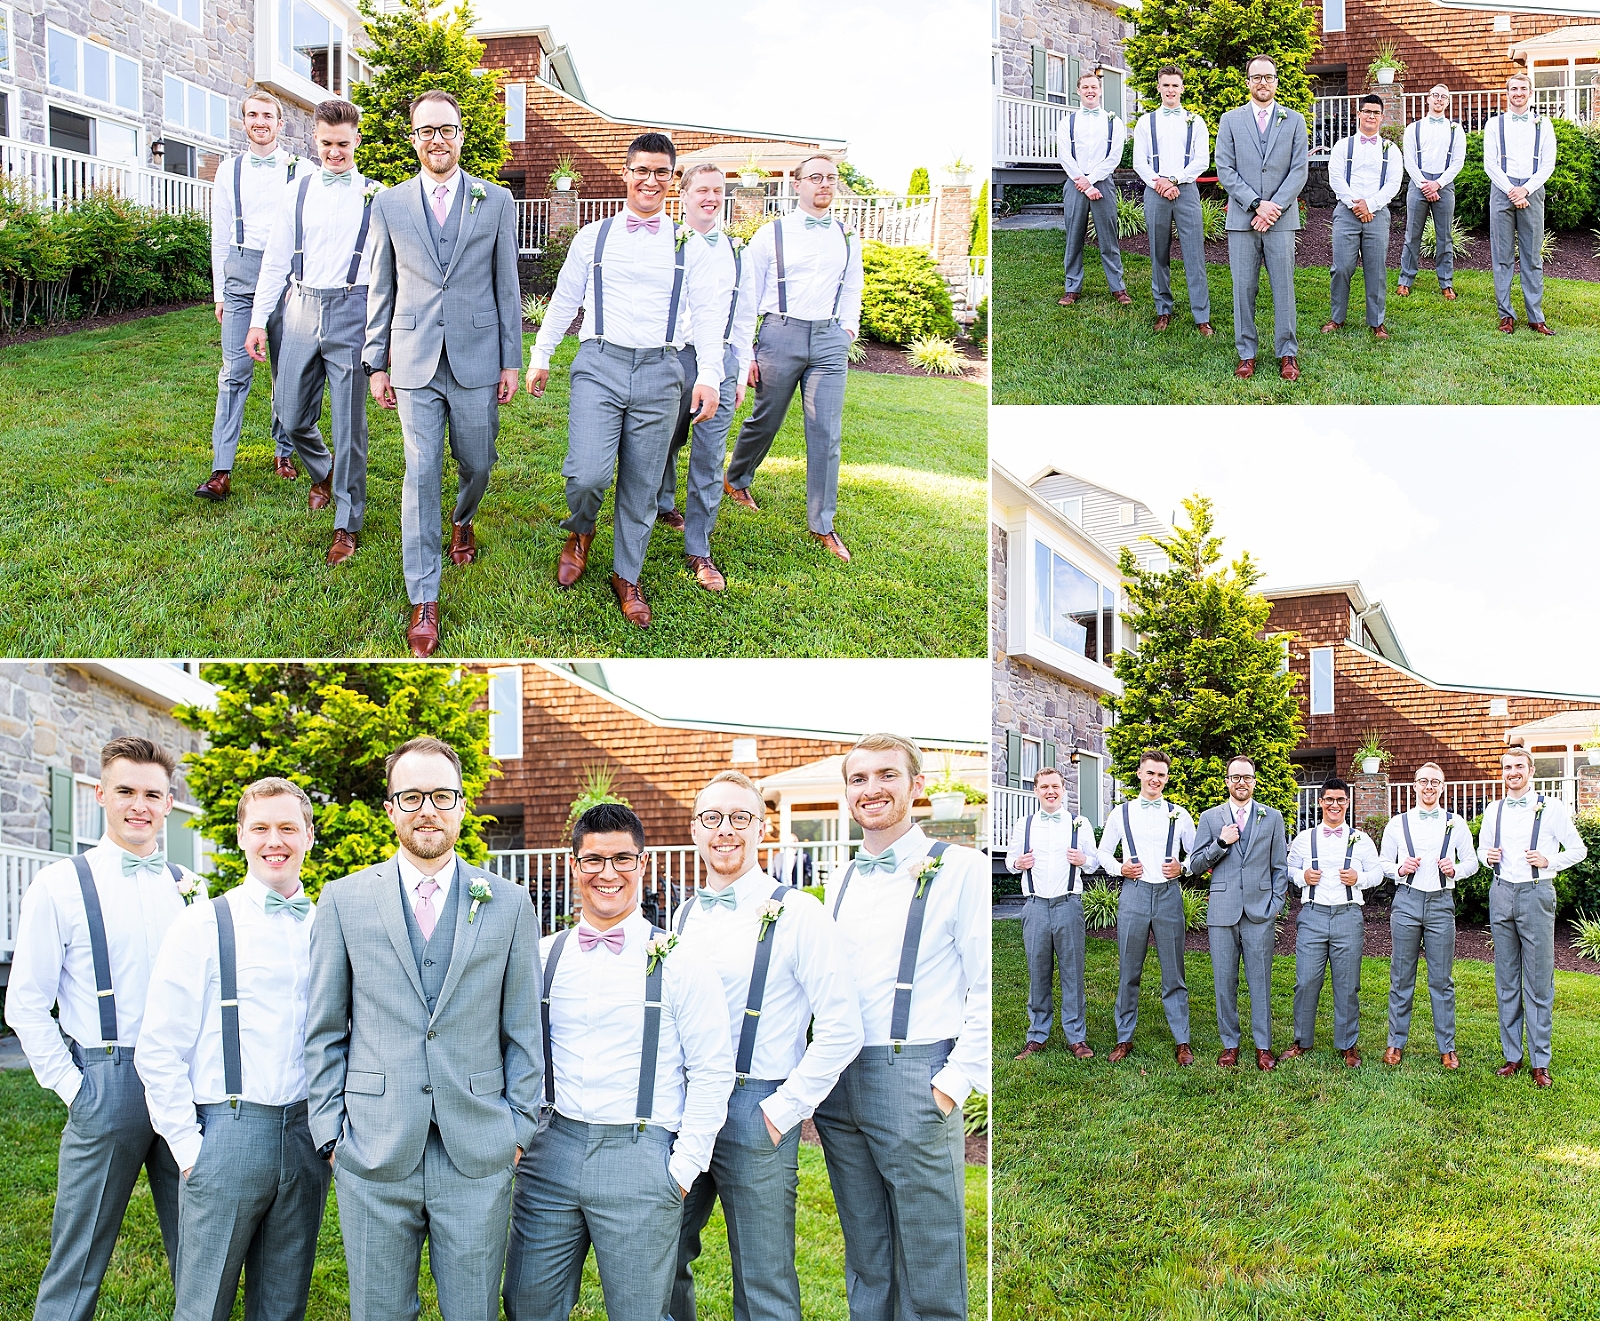 Check out this BEAUTIFUL MARYLAND WEDDING!! This wedding was at Morningside Inn in Frederick, Maryland in June. The rolling hills, beautiful venue, and willow tree were breathtaking. Wedding photos, summer wedding, June wedding, Virginia wedding, wedding photographer. Photographed by Bethanie Vetter Photography LLC. #MorningsideInn #MarylandWedding #VirginiaWedding #SummerWedding #June #WeddingPhotos #WeddingPhotography